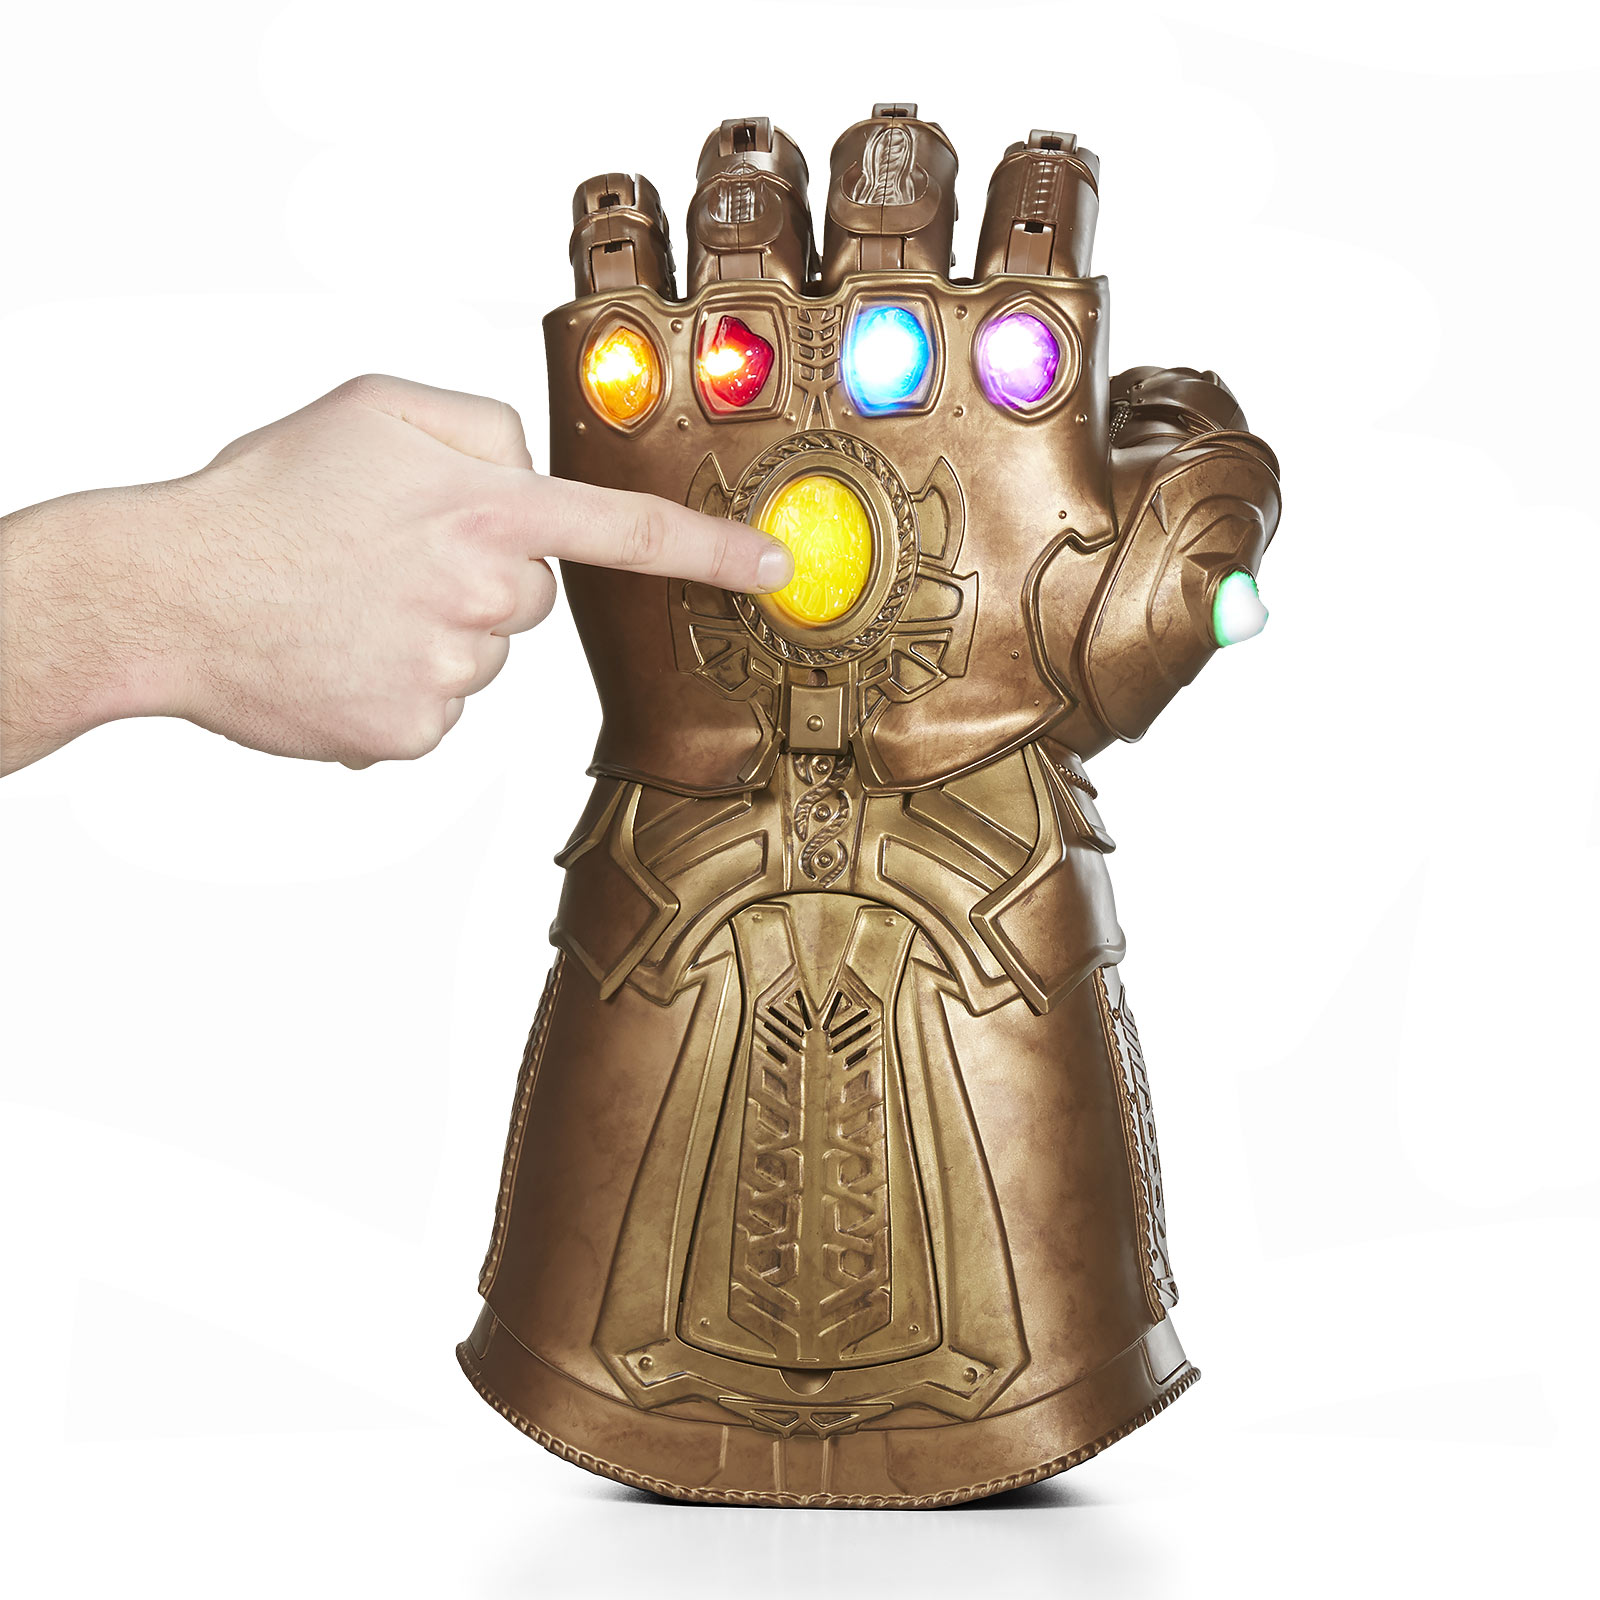 Avengers - Thanos Infinity Gauntlet with Light and Sound